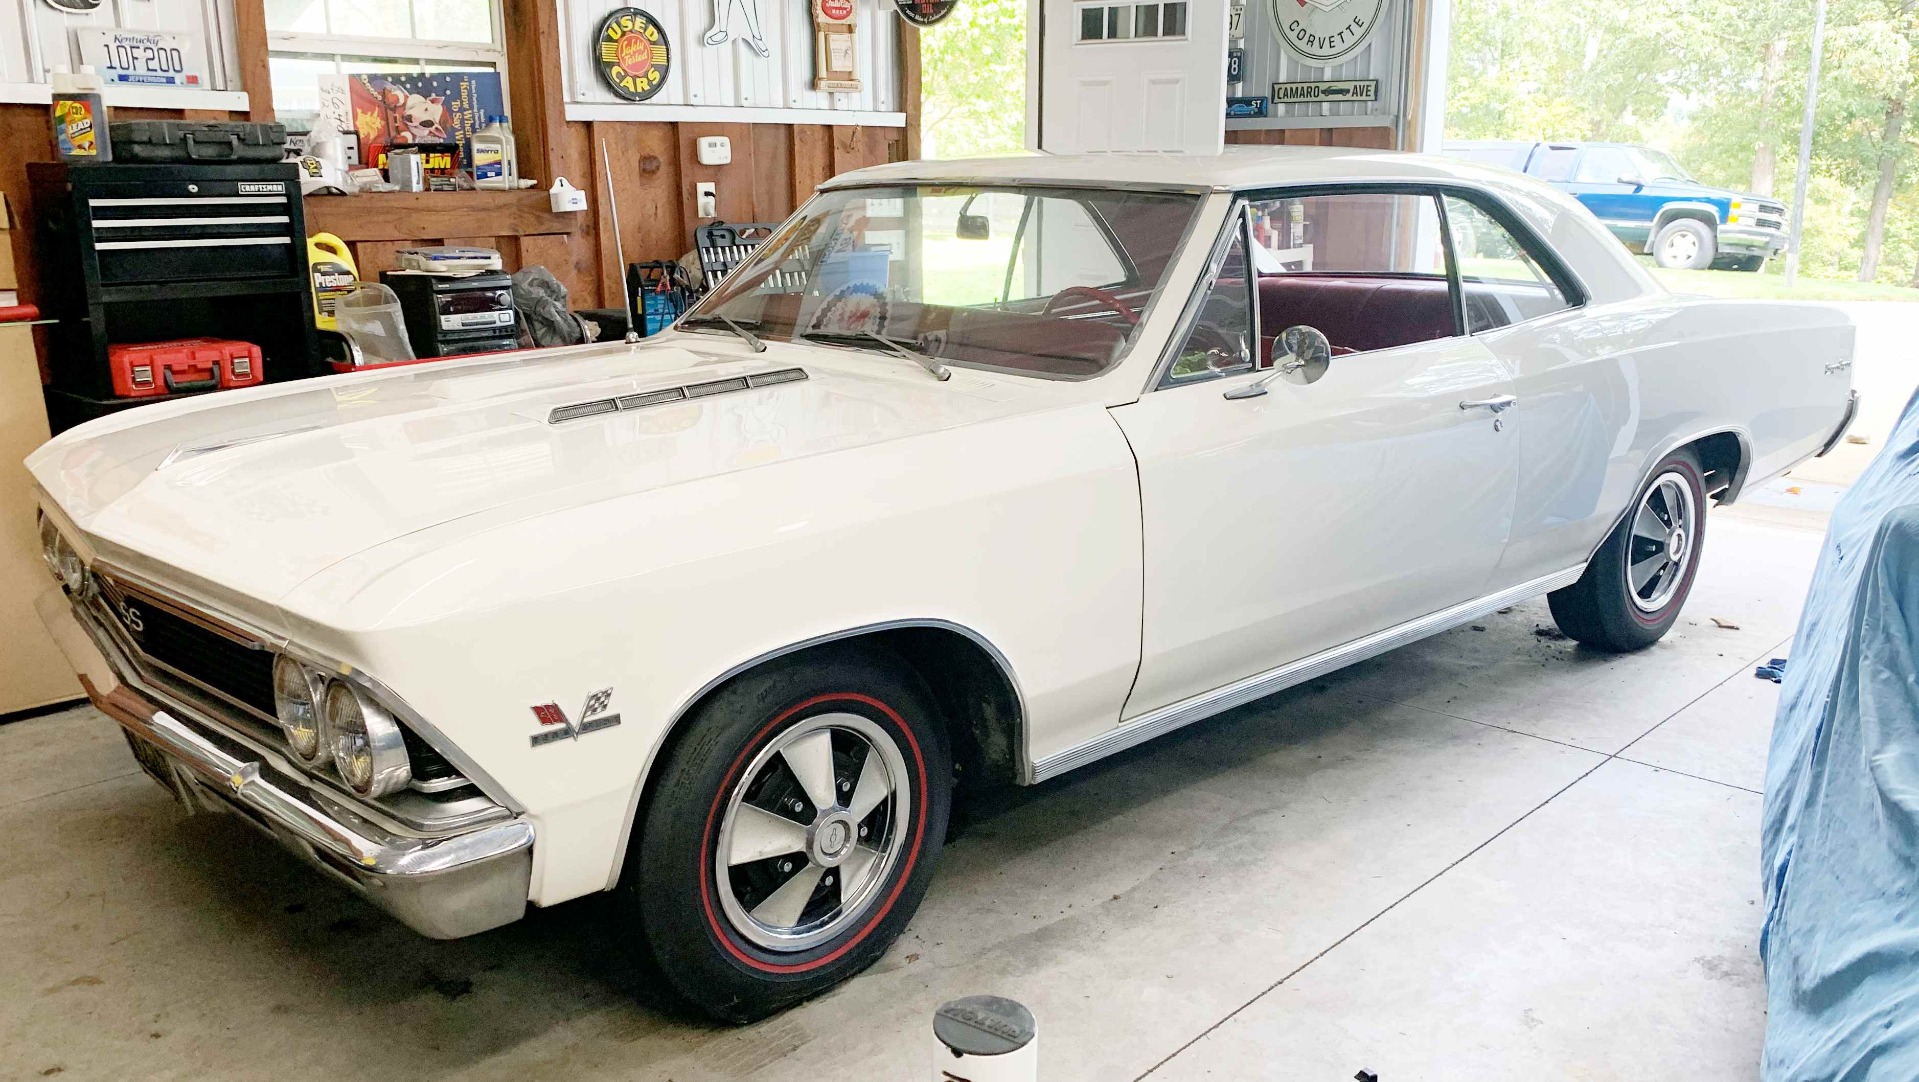 Used 1966 Chevrolet Super Sport  185 , For Sale $50000, Call Us: (704) 996-3735